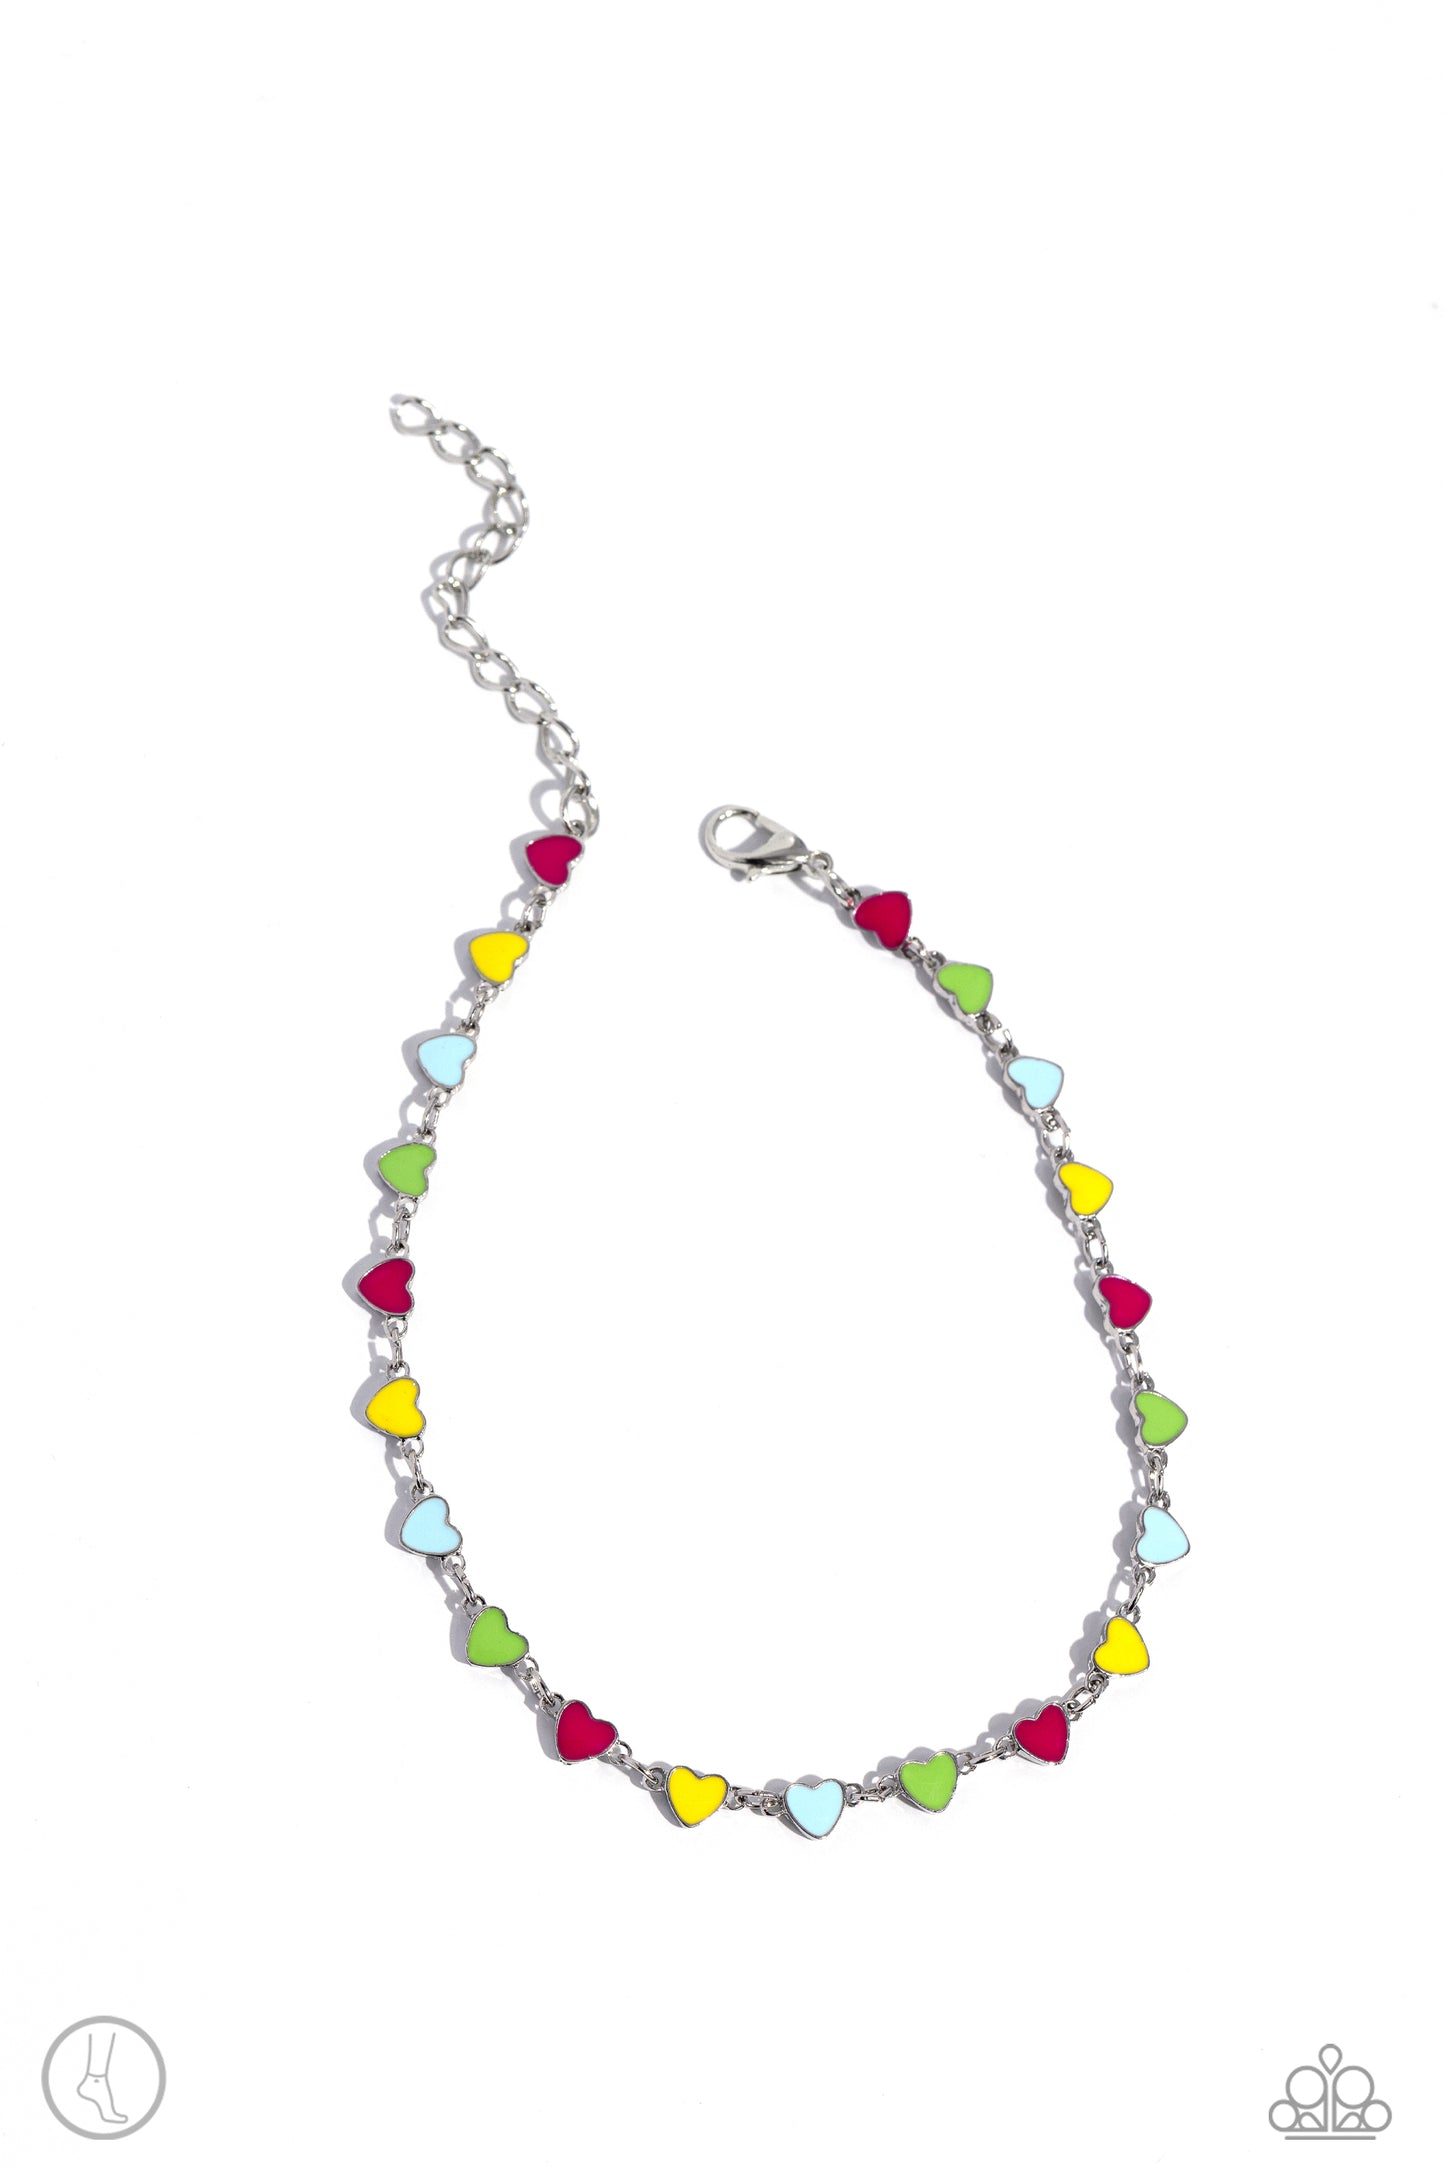 Dancing Delight - multi (pink) - Paparazzi anklet